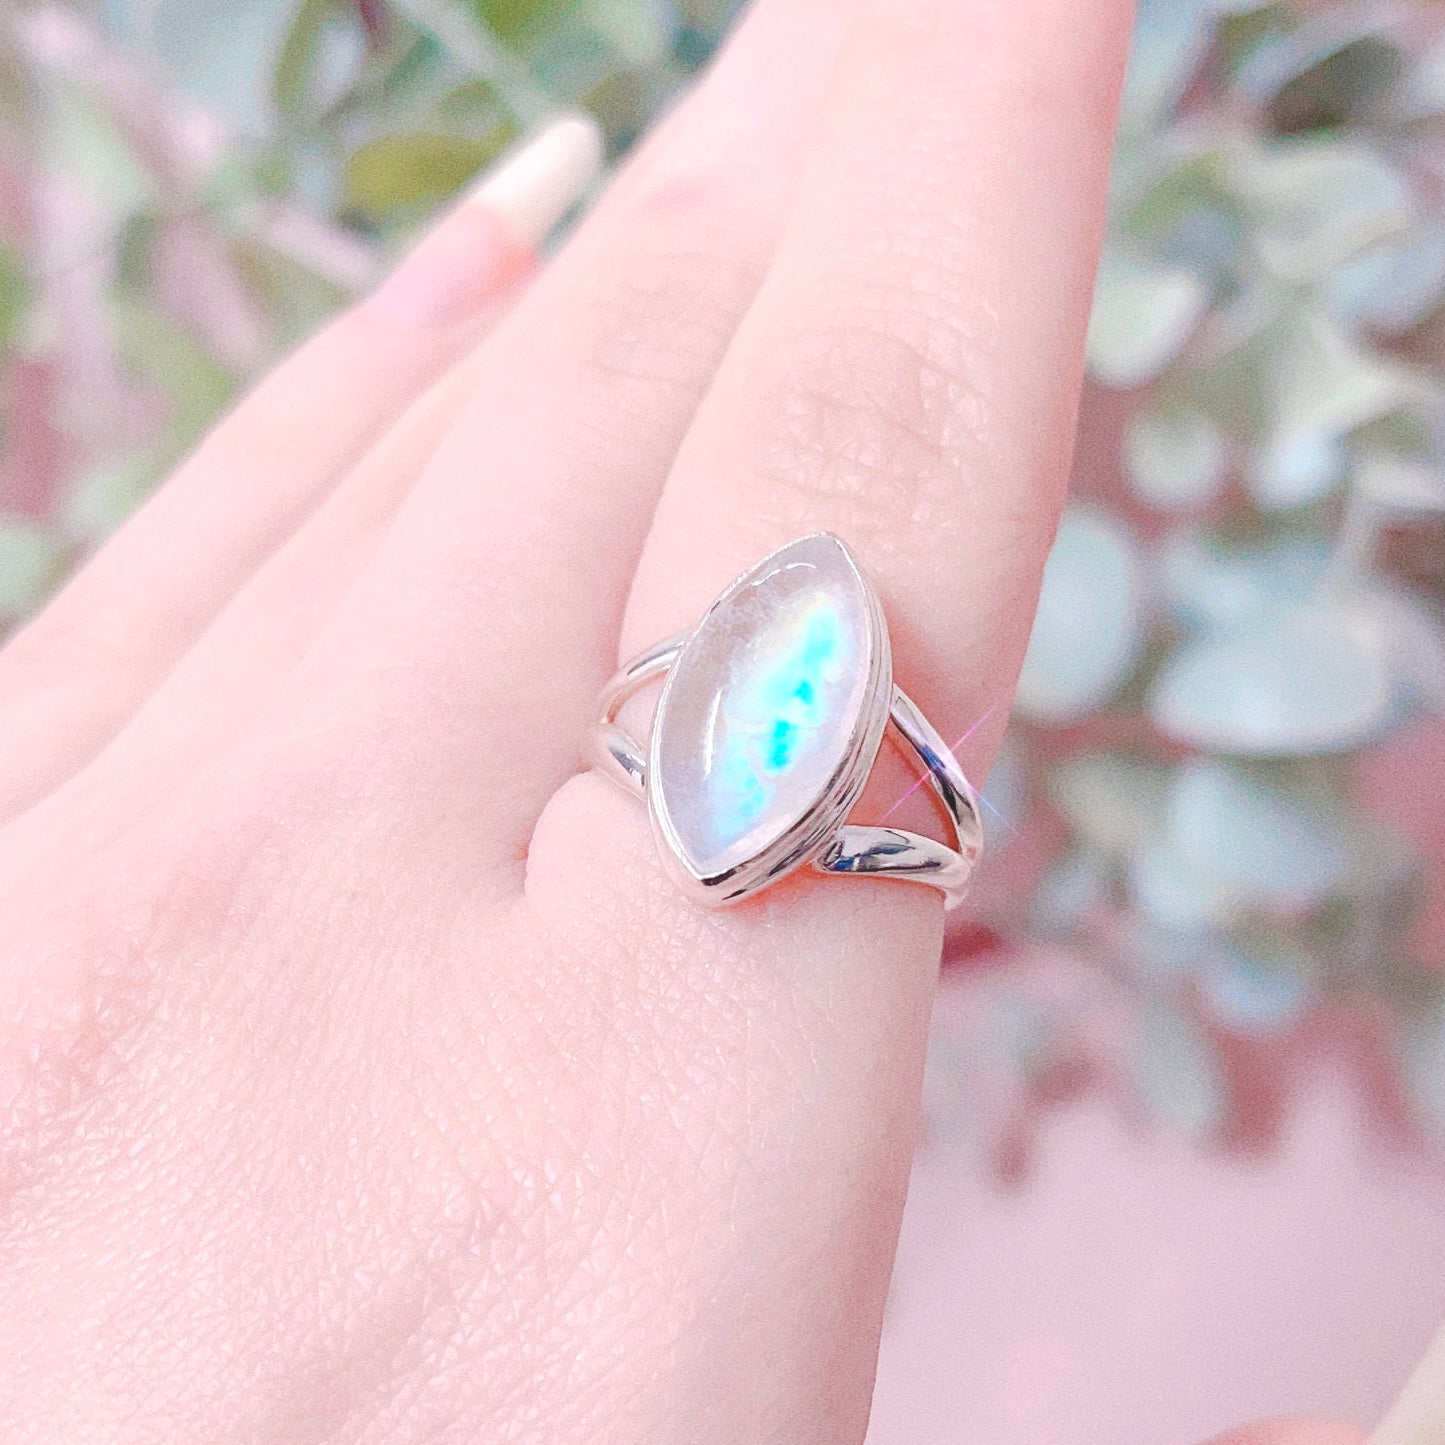 Rainbow Moonstone 925 Sterling Silver Ring - Size 6.5